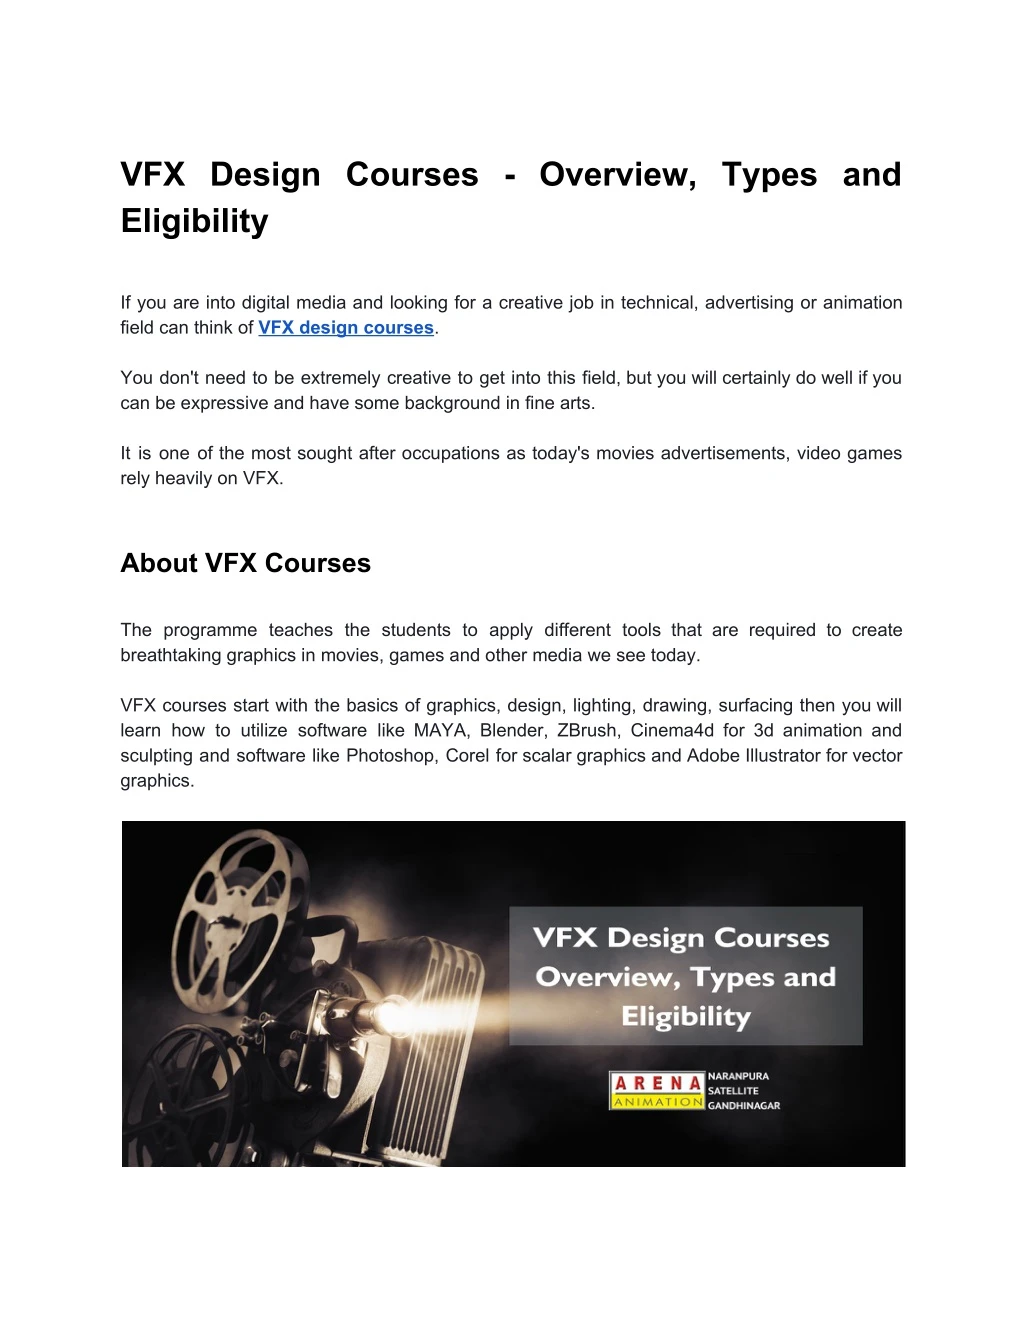 vfx design courses overview types and eligibility